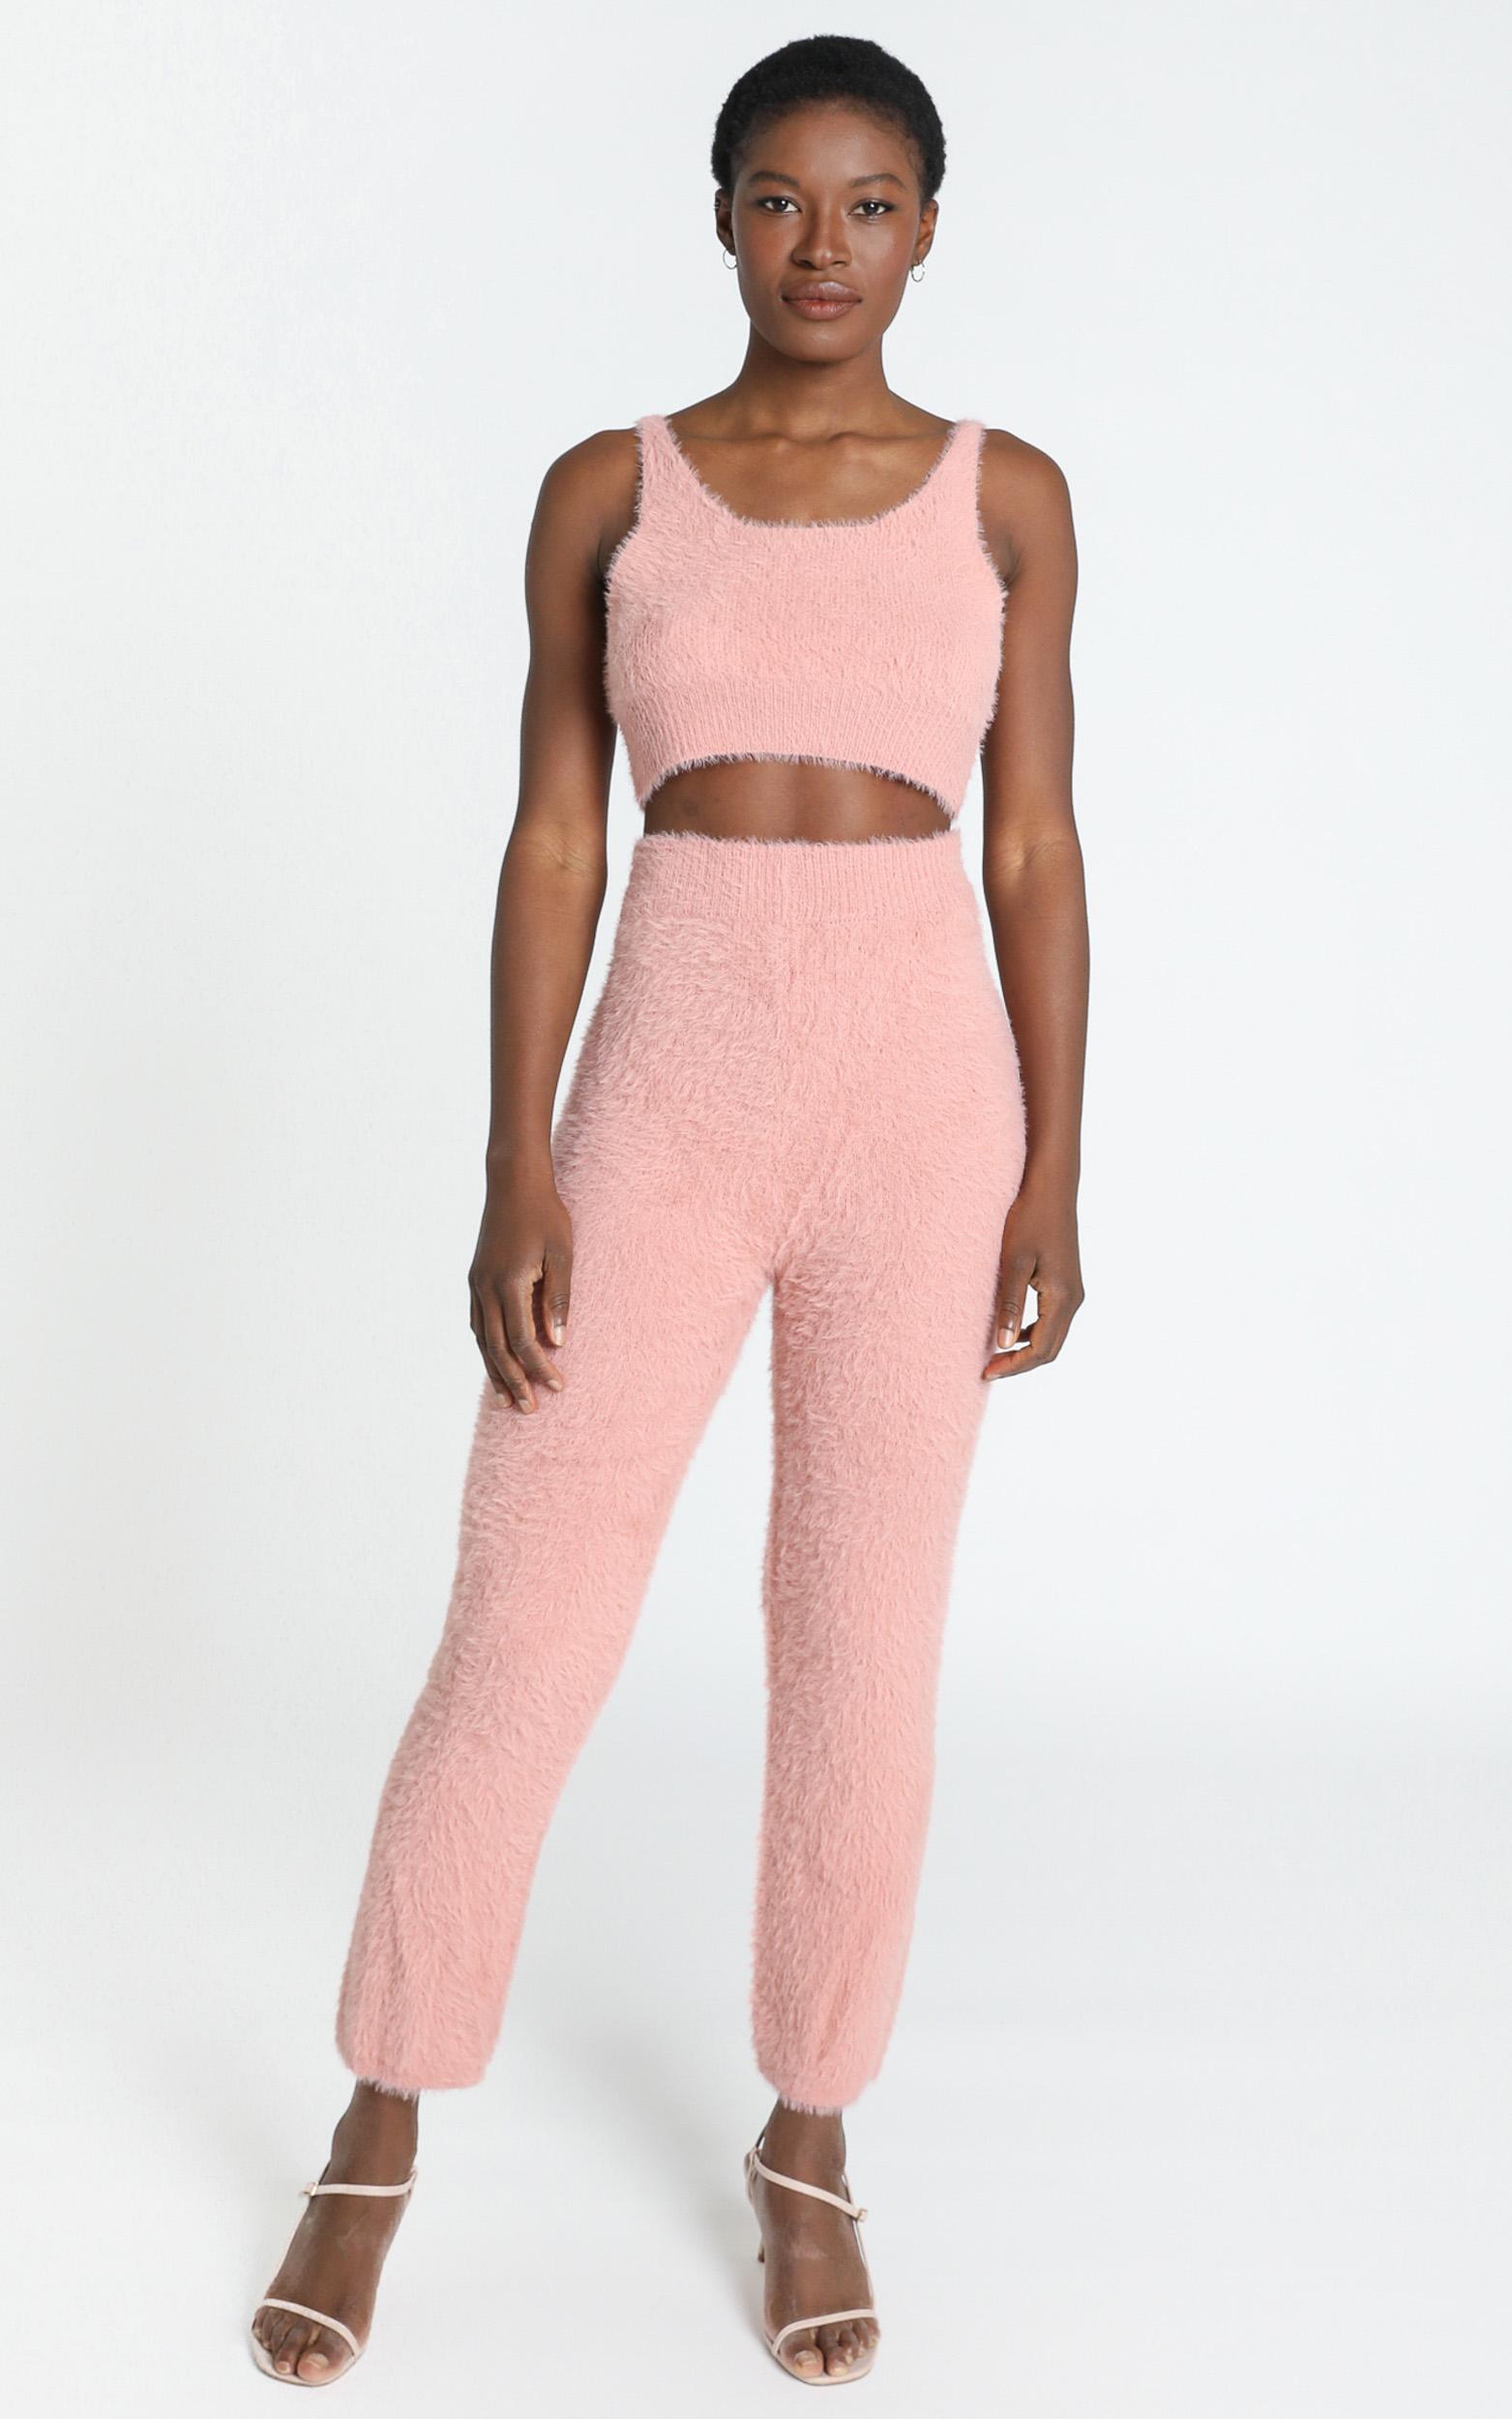 Athena Fluffy Knit Two Piece Set in Blush - S, Blush, hi-res image number null